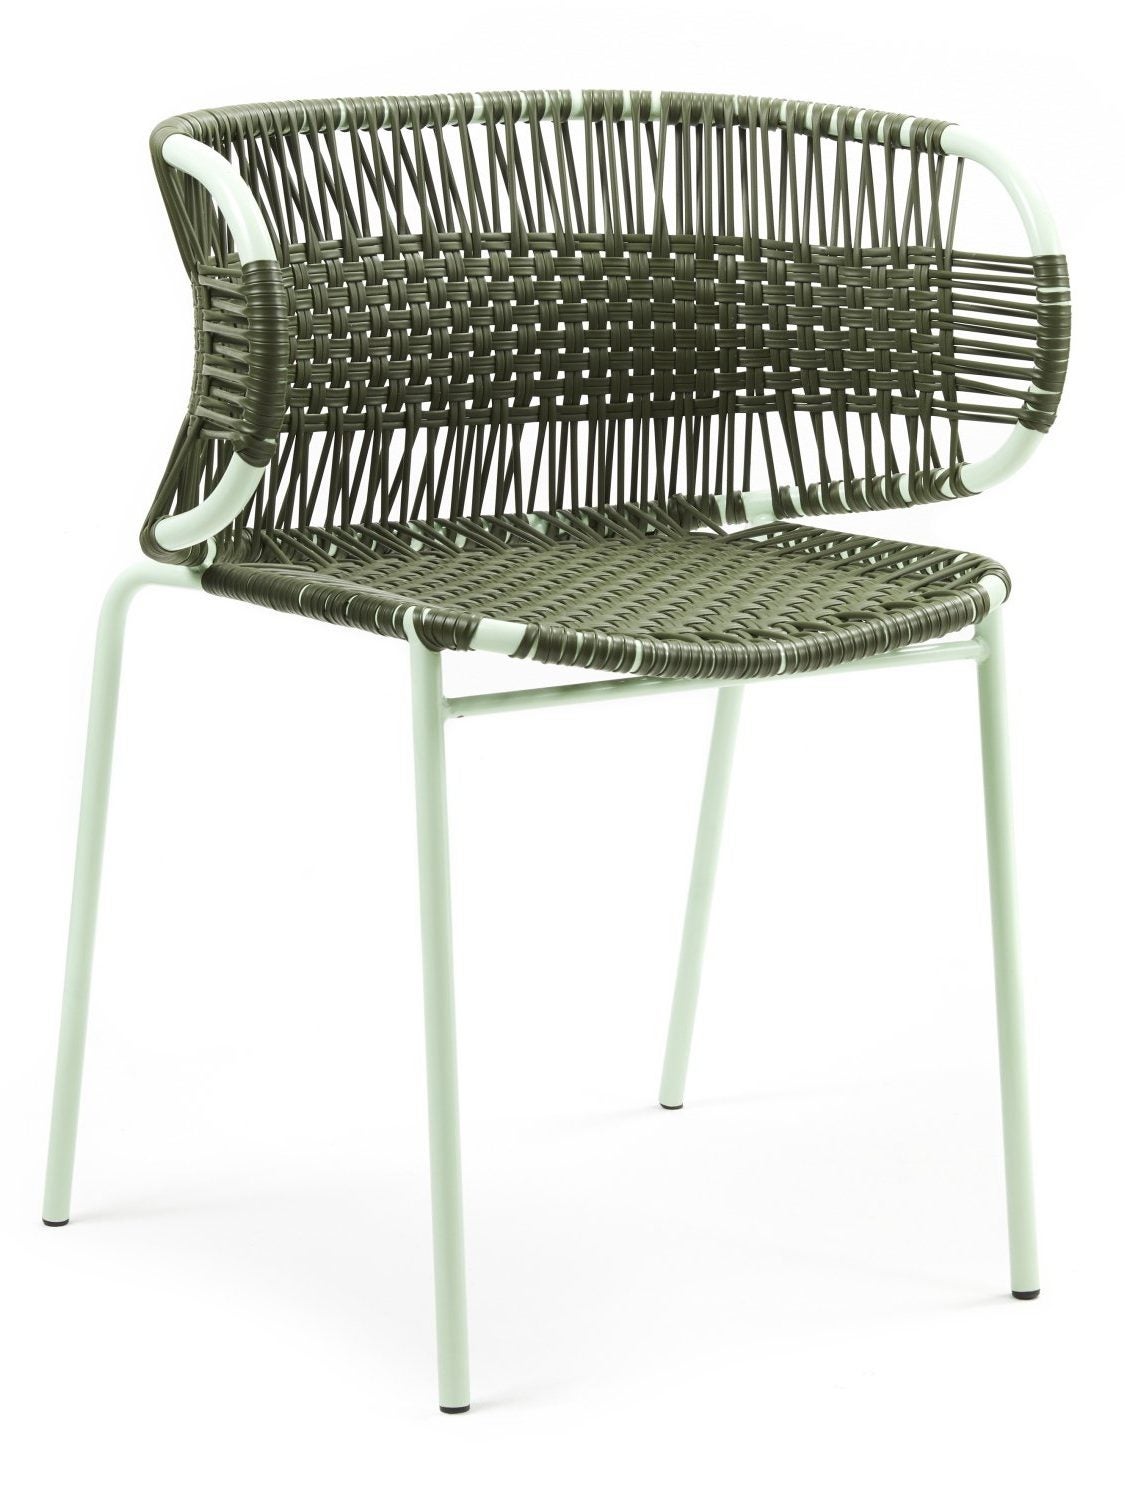 This Might Be the New Rattan Chair